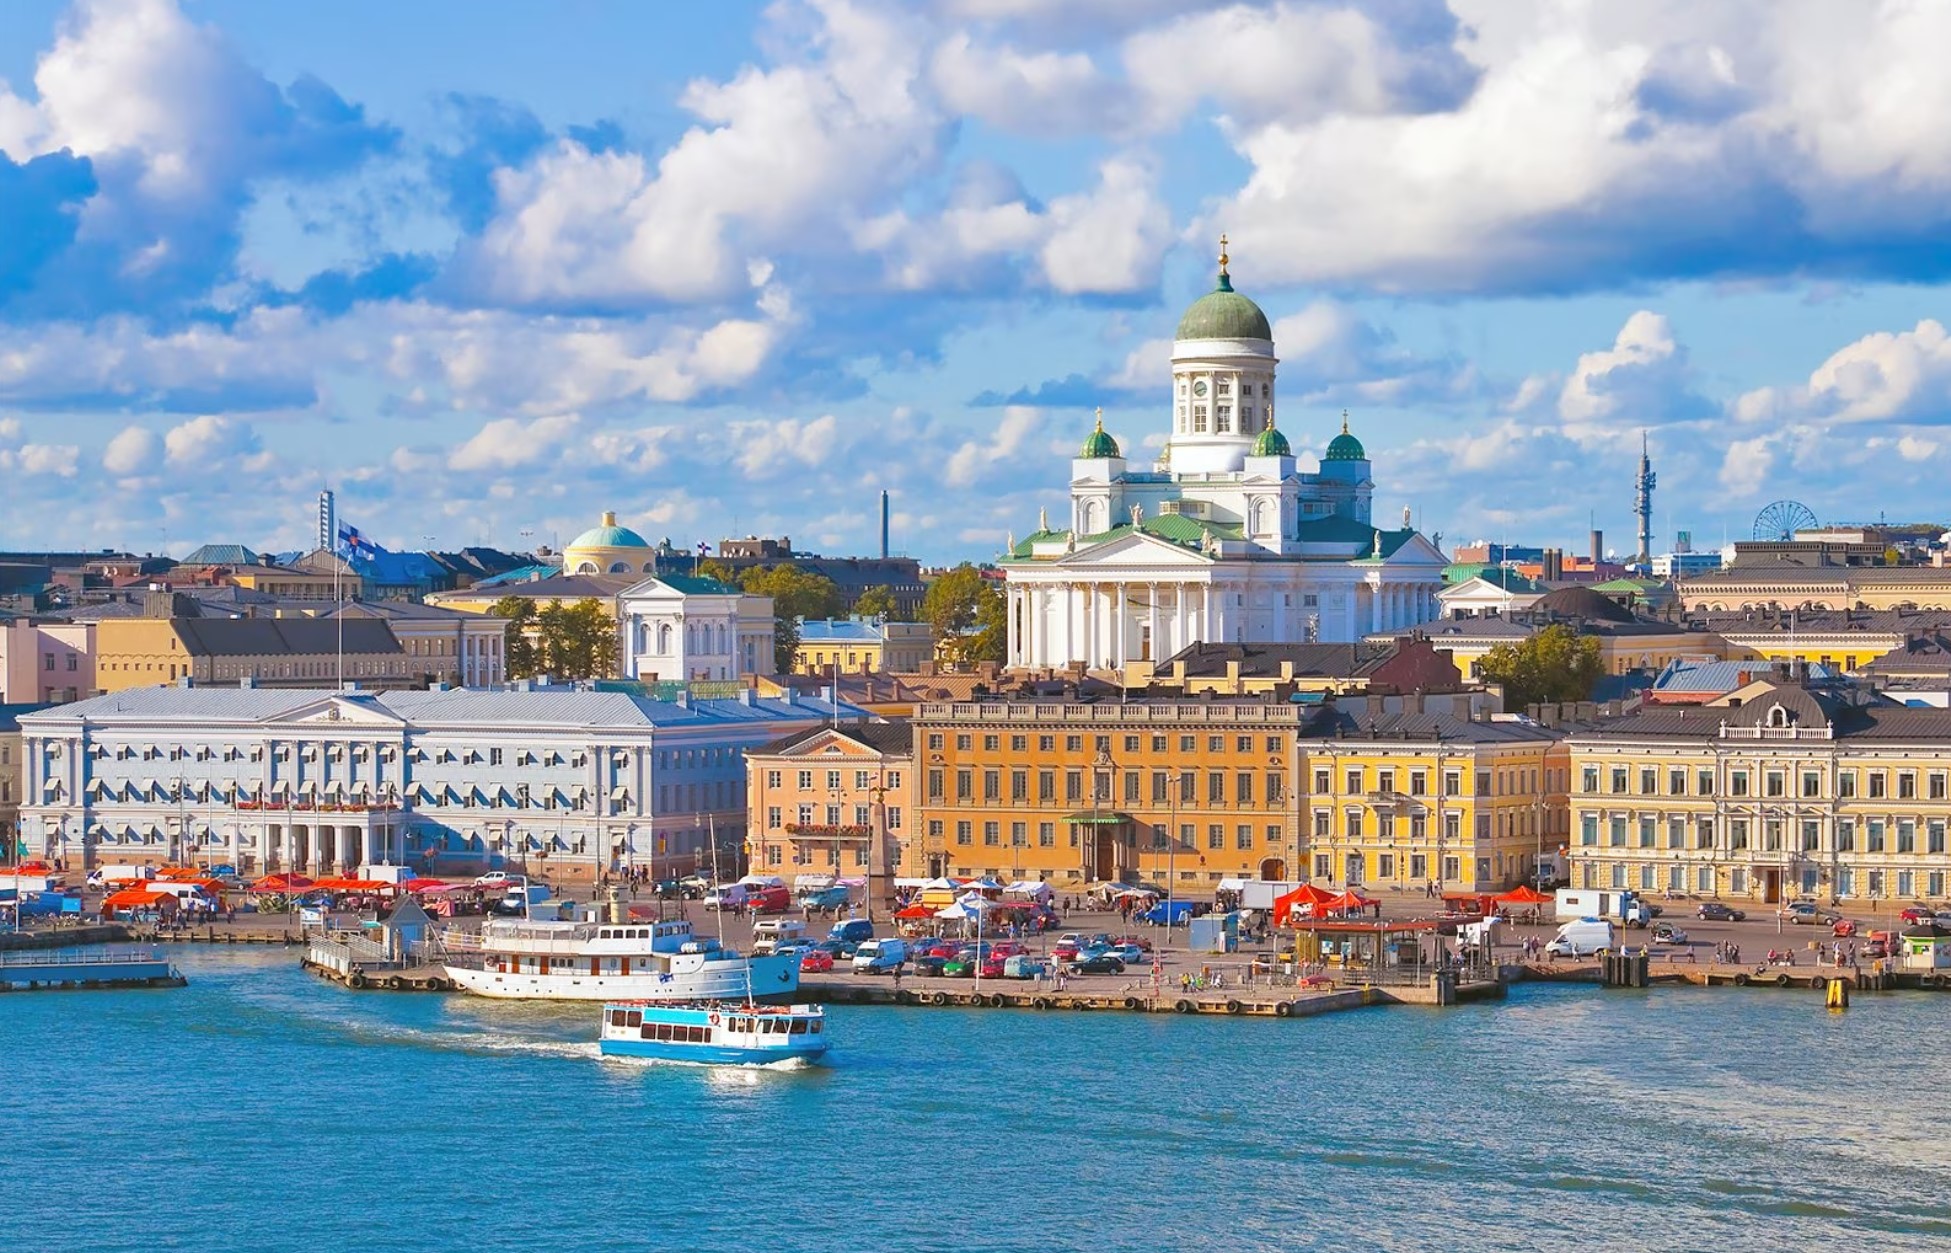 Finland's attractions